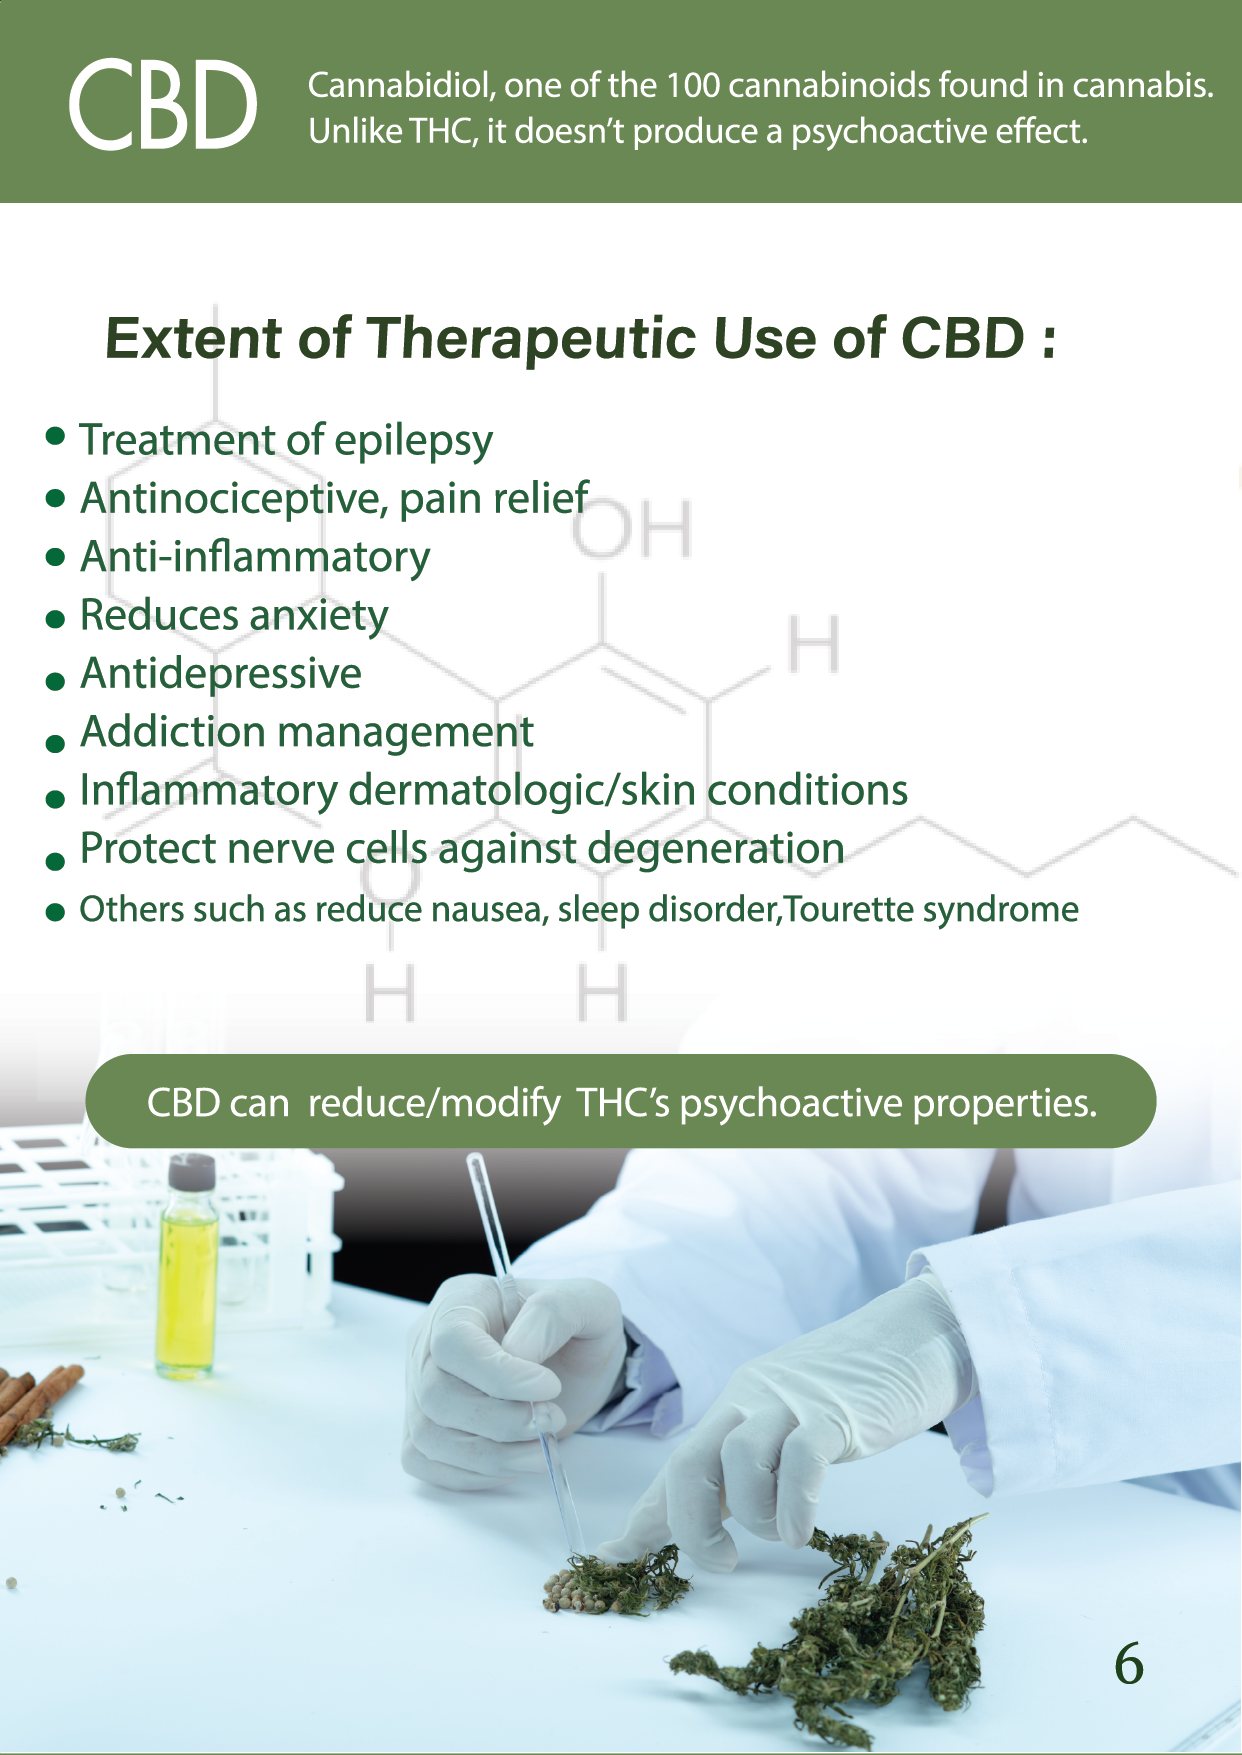 Benefit of CBD includes : treatment of epilepsy, pain relief, reduces anxiety, anti-inflammatory, protect nerves cells against degeneration etc...sawasdee clinic bangkok medical cannabis